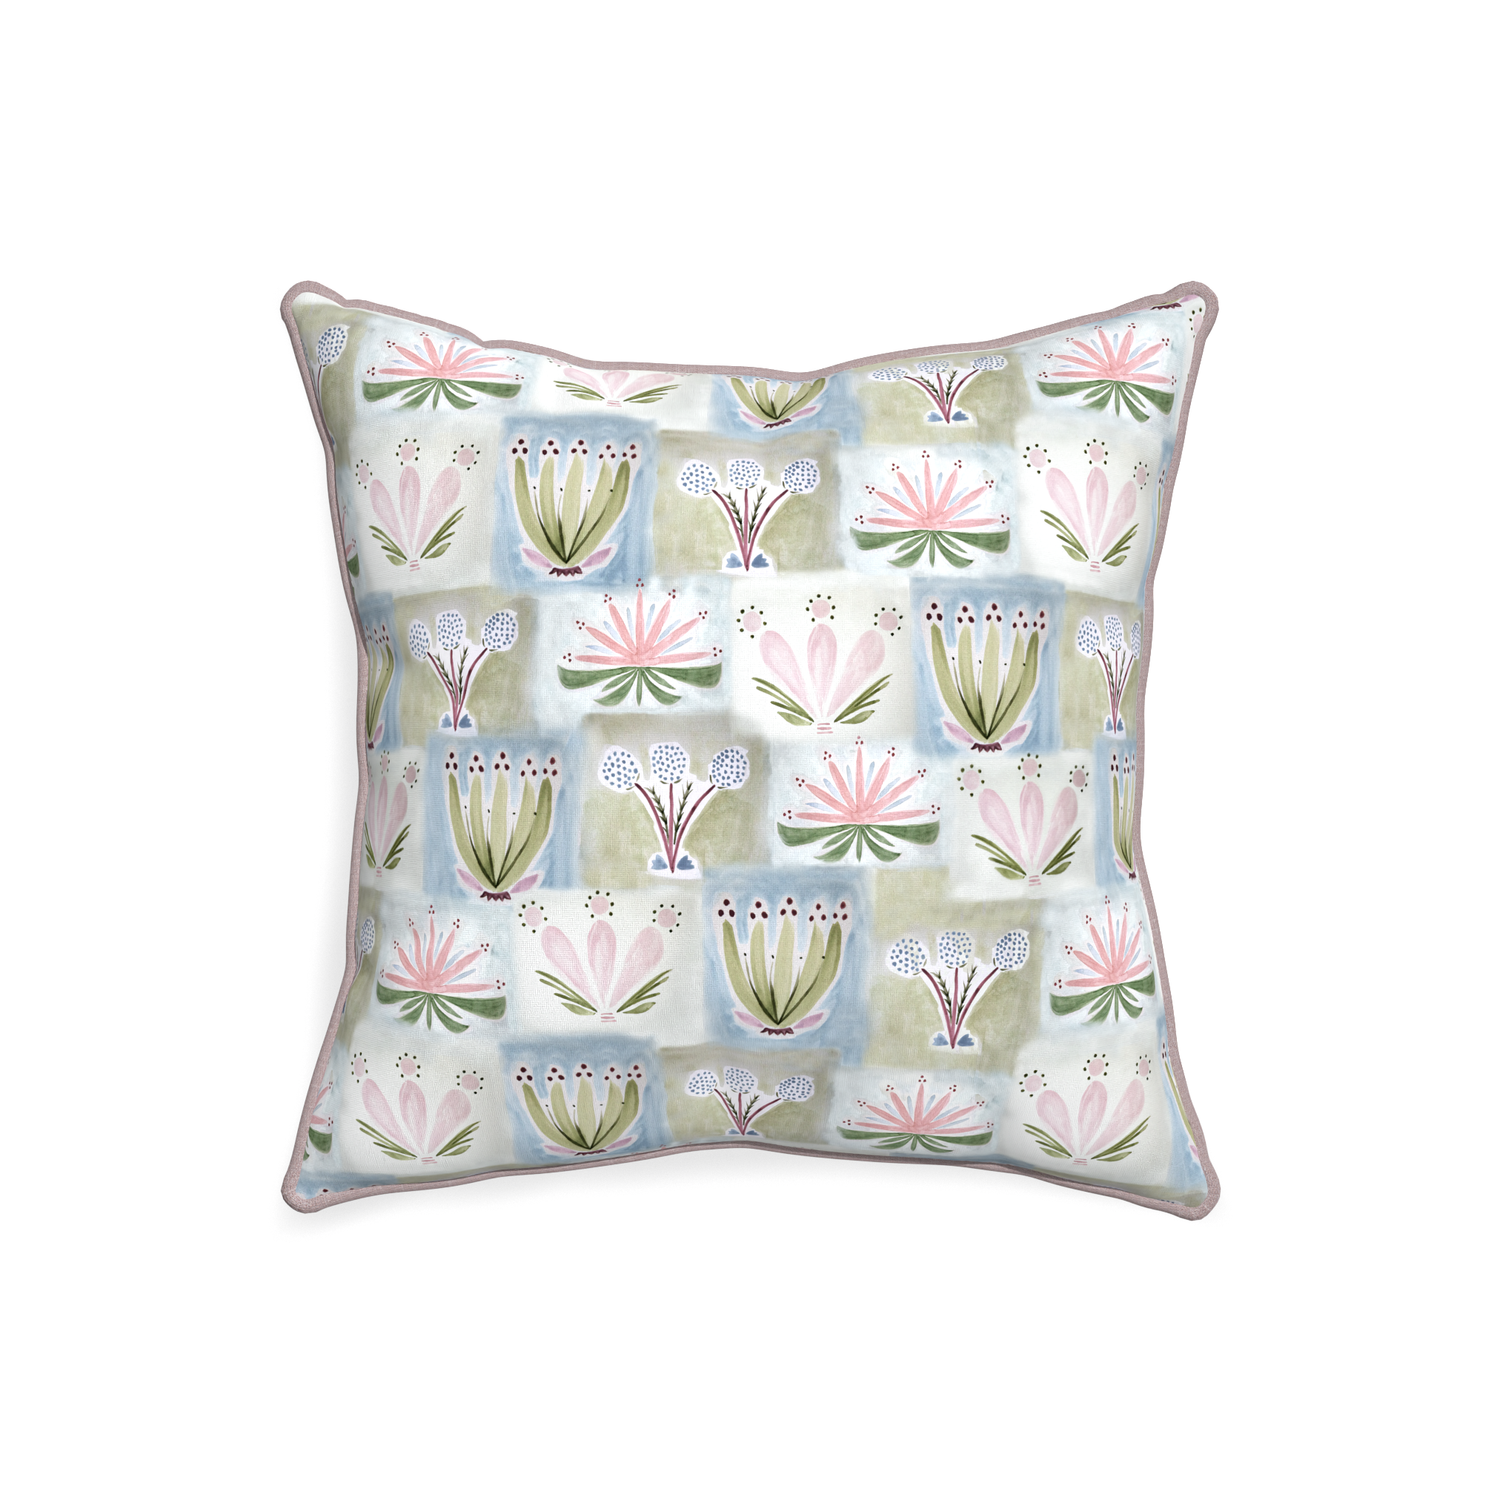 20-square harper custom hand-painted floralpillow with orchid piping on white background